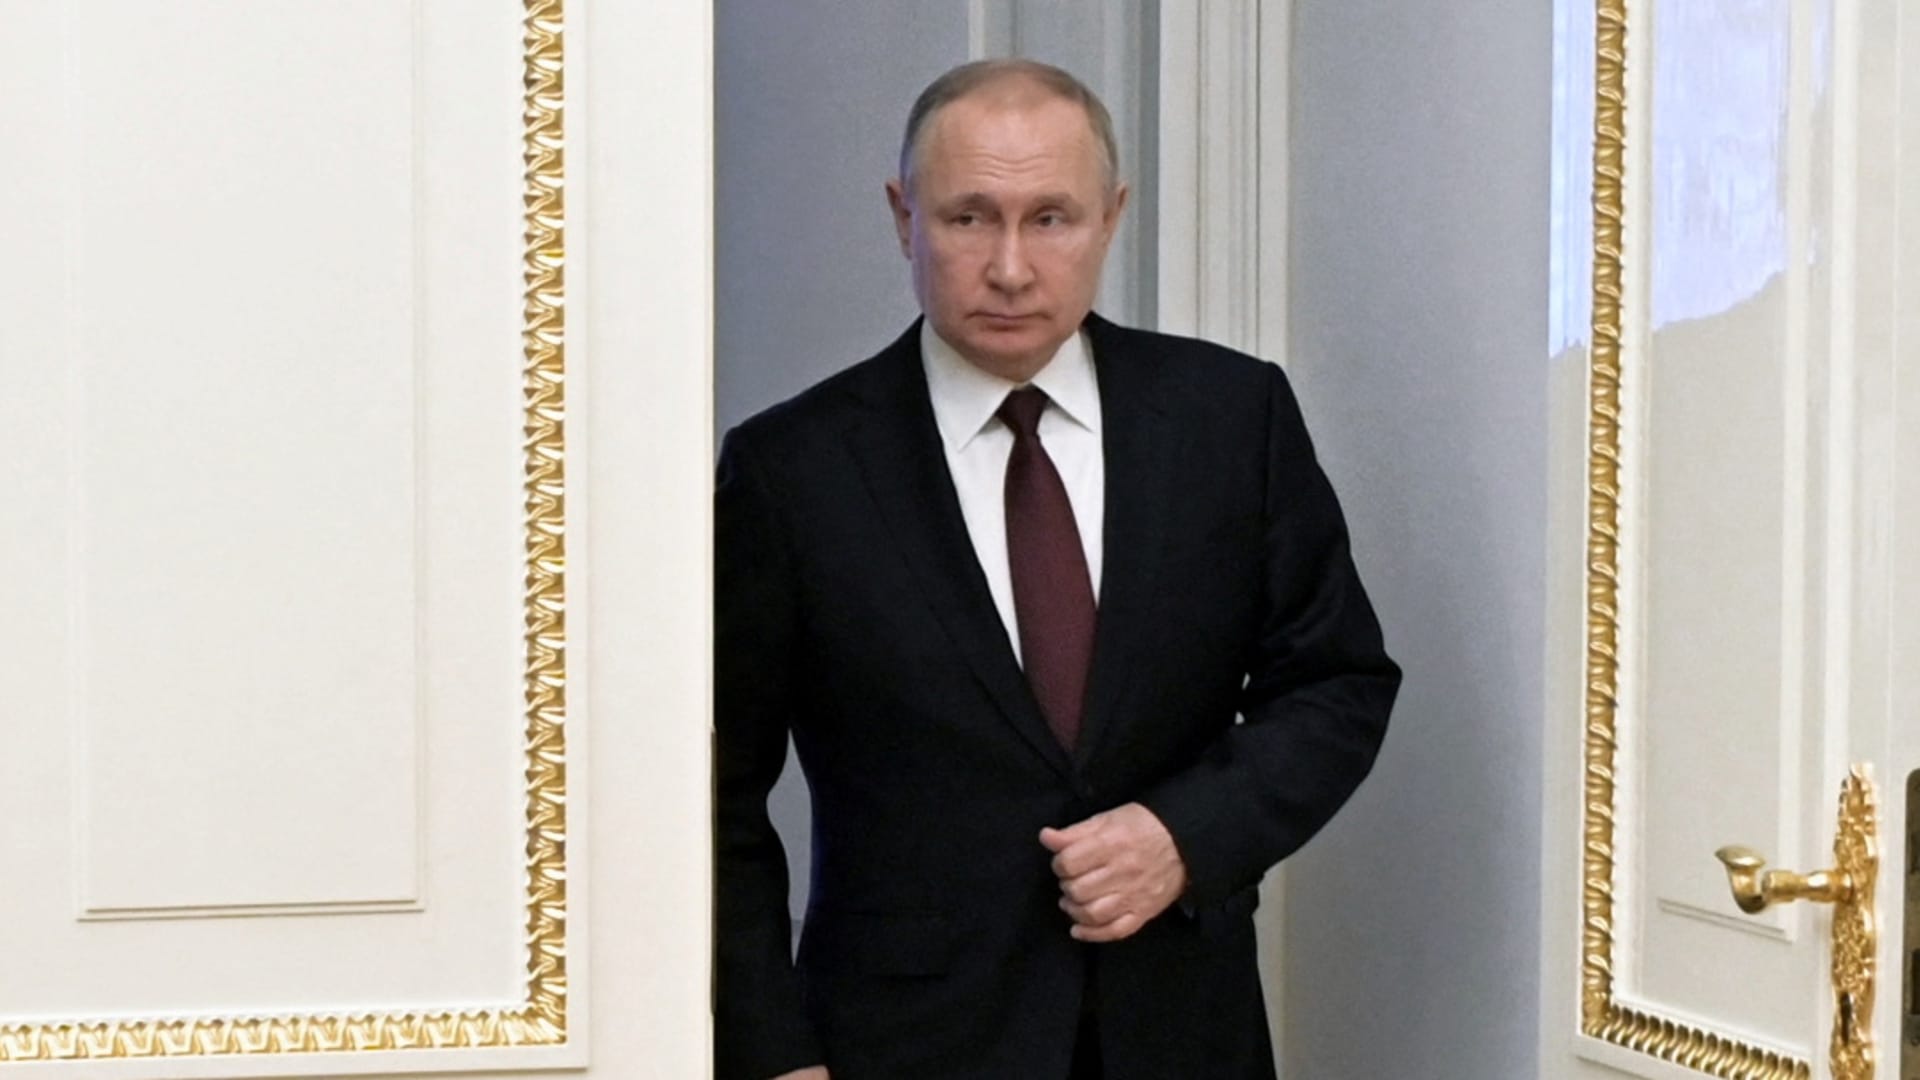 Russian President Vladimir Putin enters a hall before a meeting with members of the Security Council via a video link in Moscow, Russia February 25, 2022.